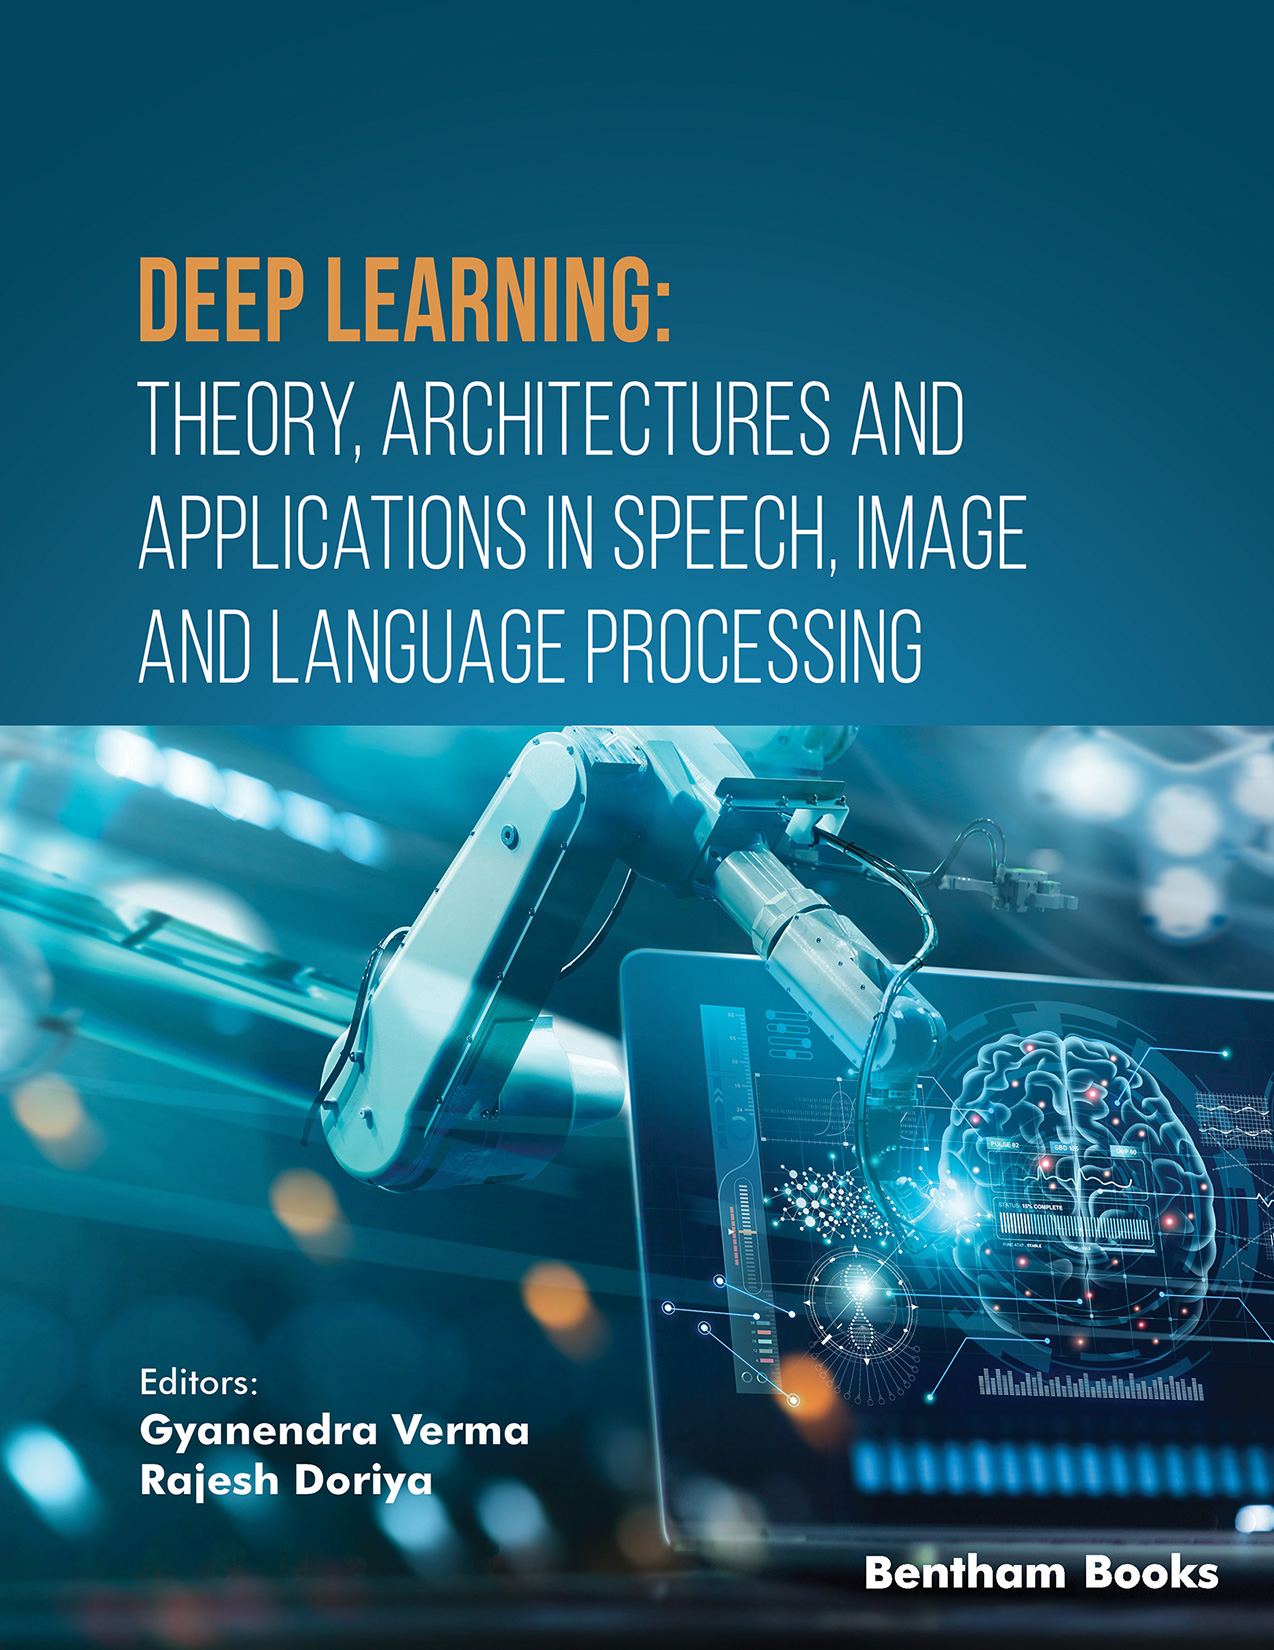 Deep Learning: Theory, Architectures, and Applications in Speech, Image, and Language Processing